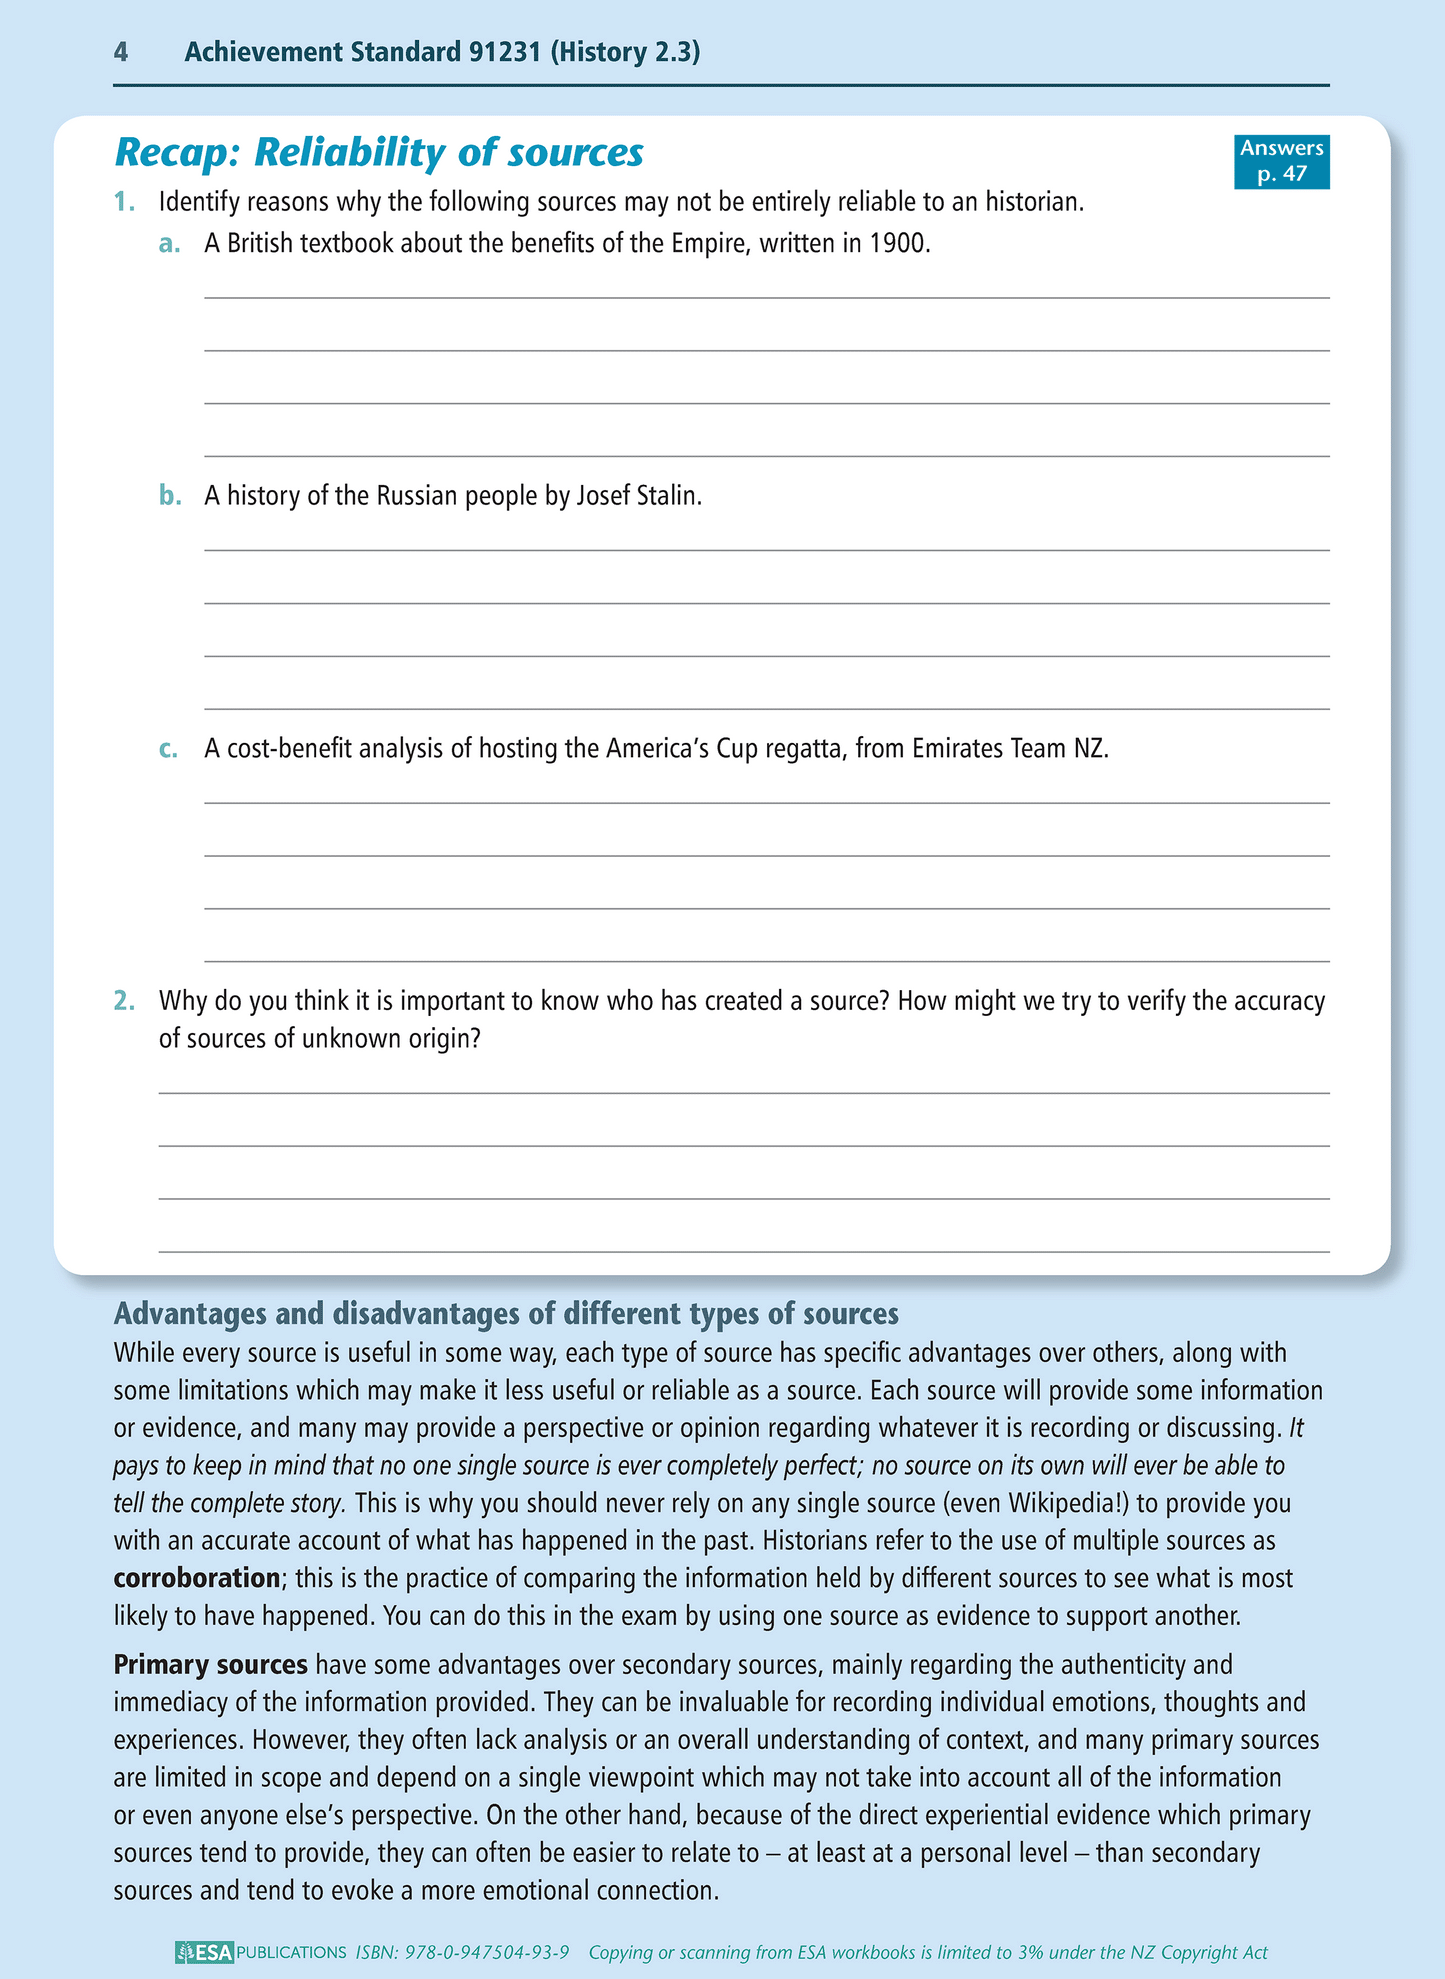 Level 2 Examining Historical Sources 2.3 Learning Workbook